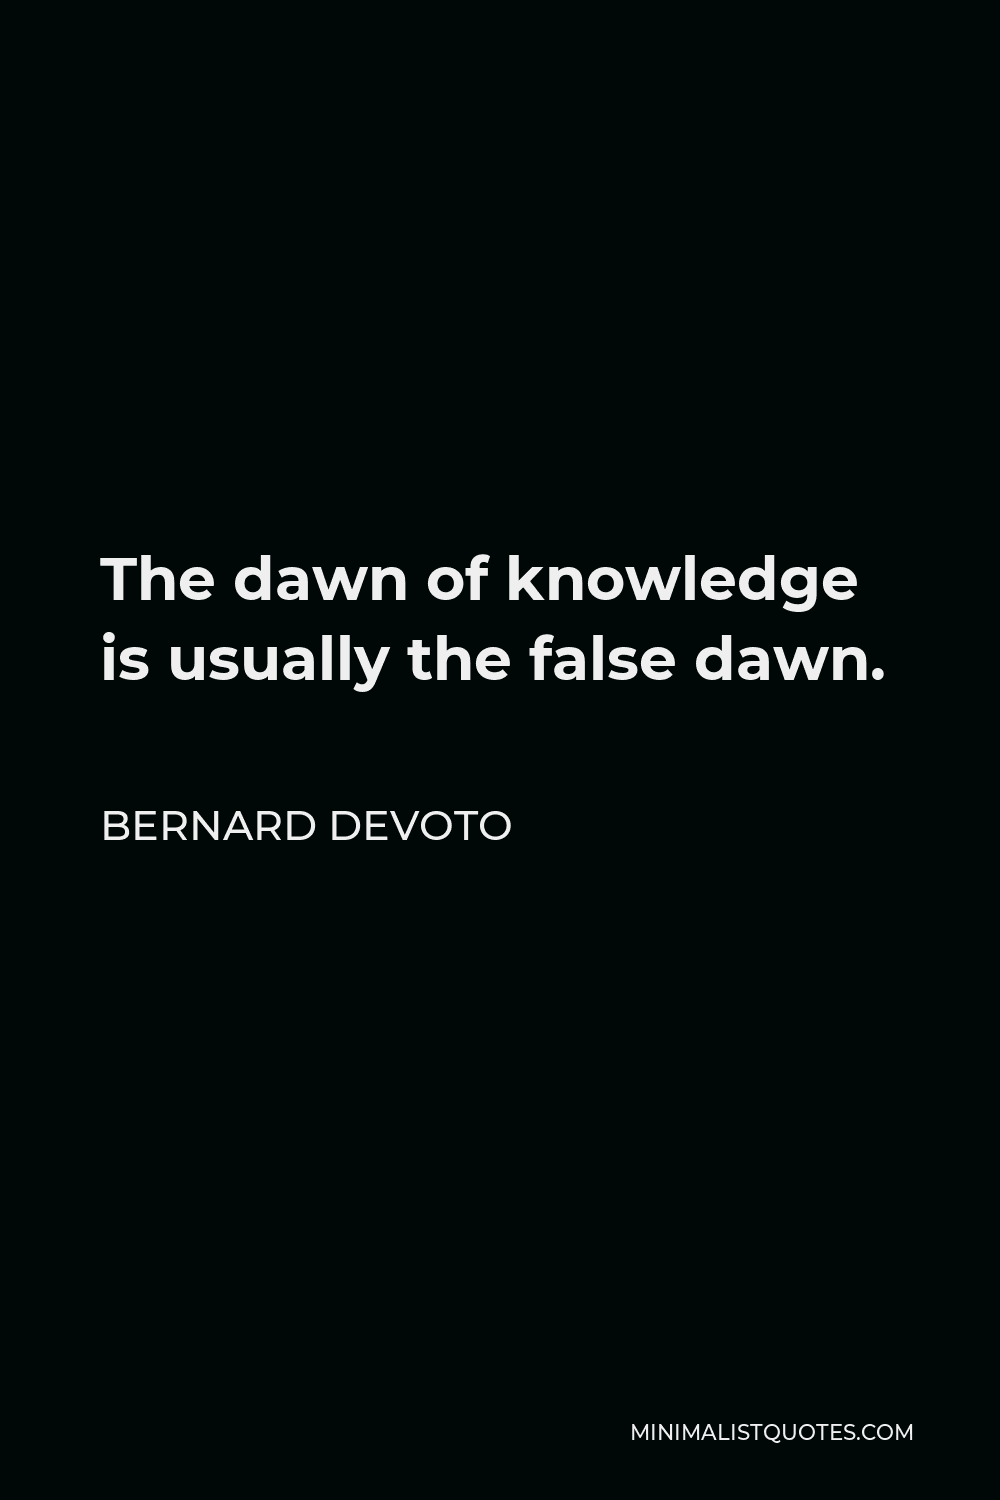 Bernard DeVoto Quote - The dawn of knowledge is usually the false dawn.